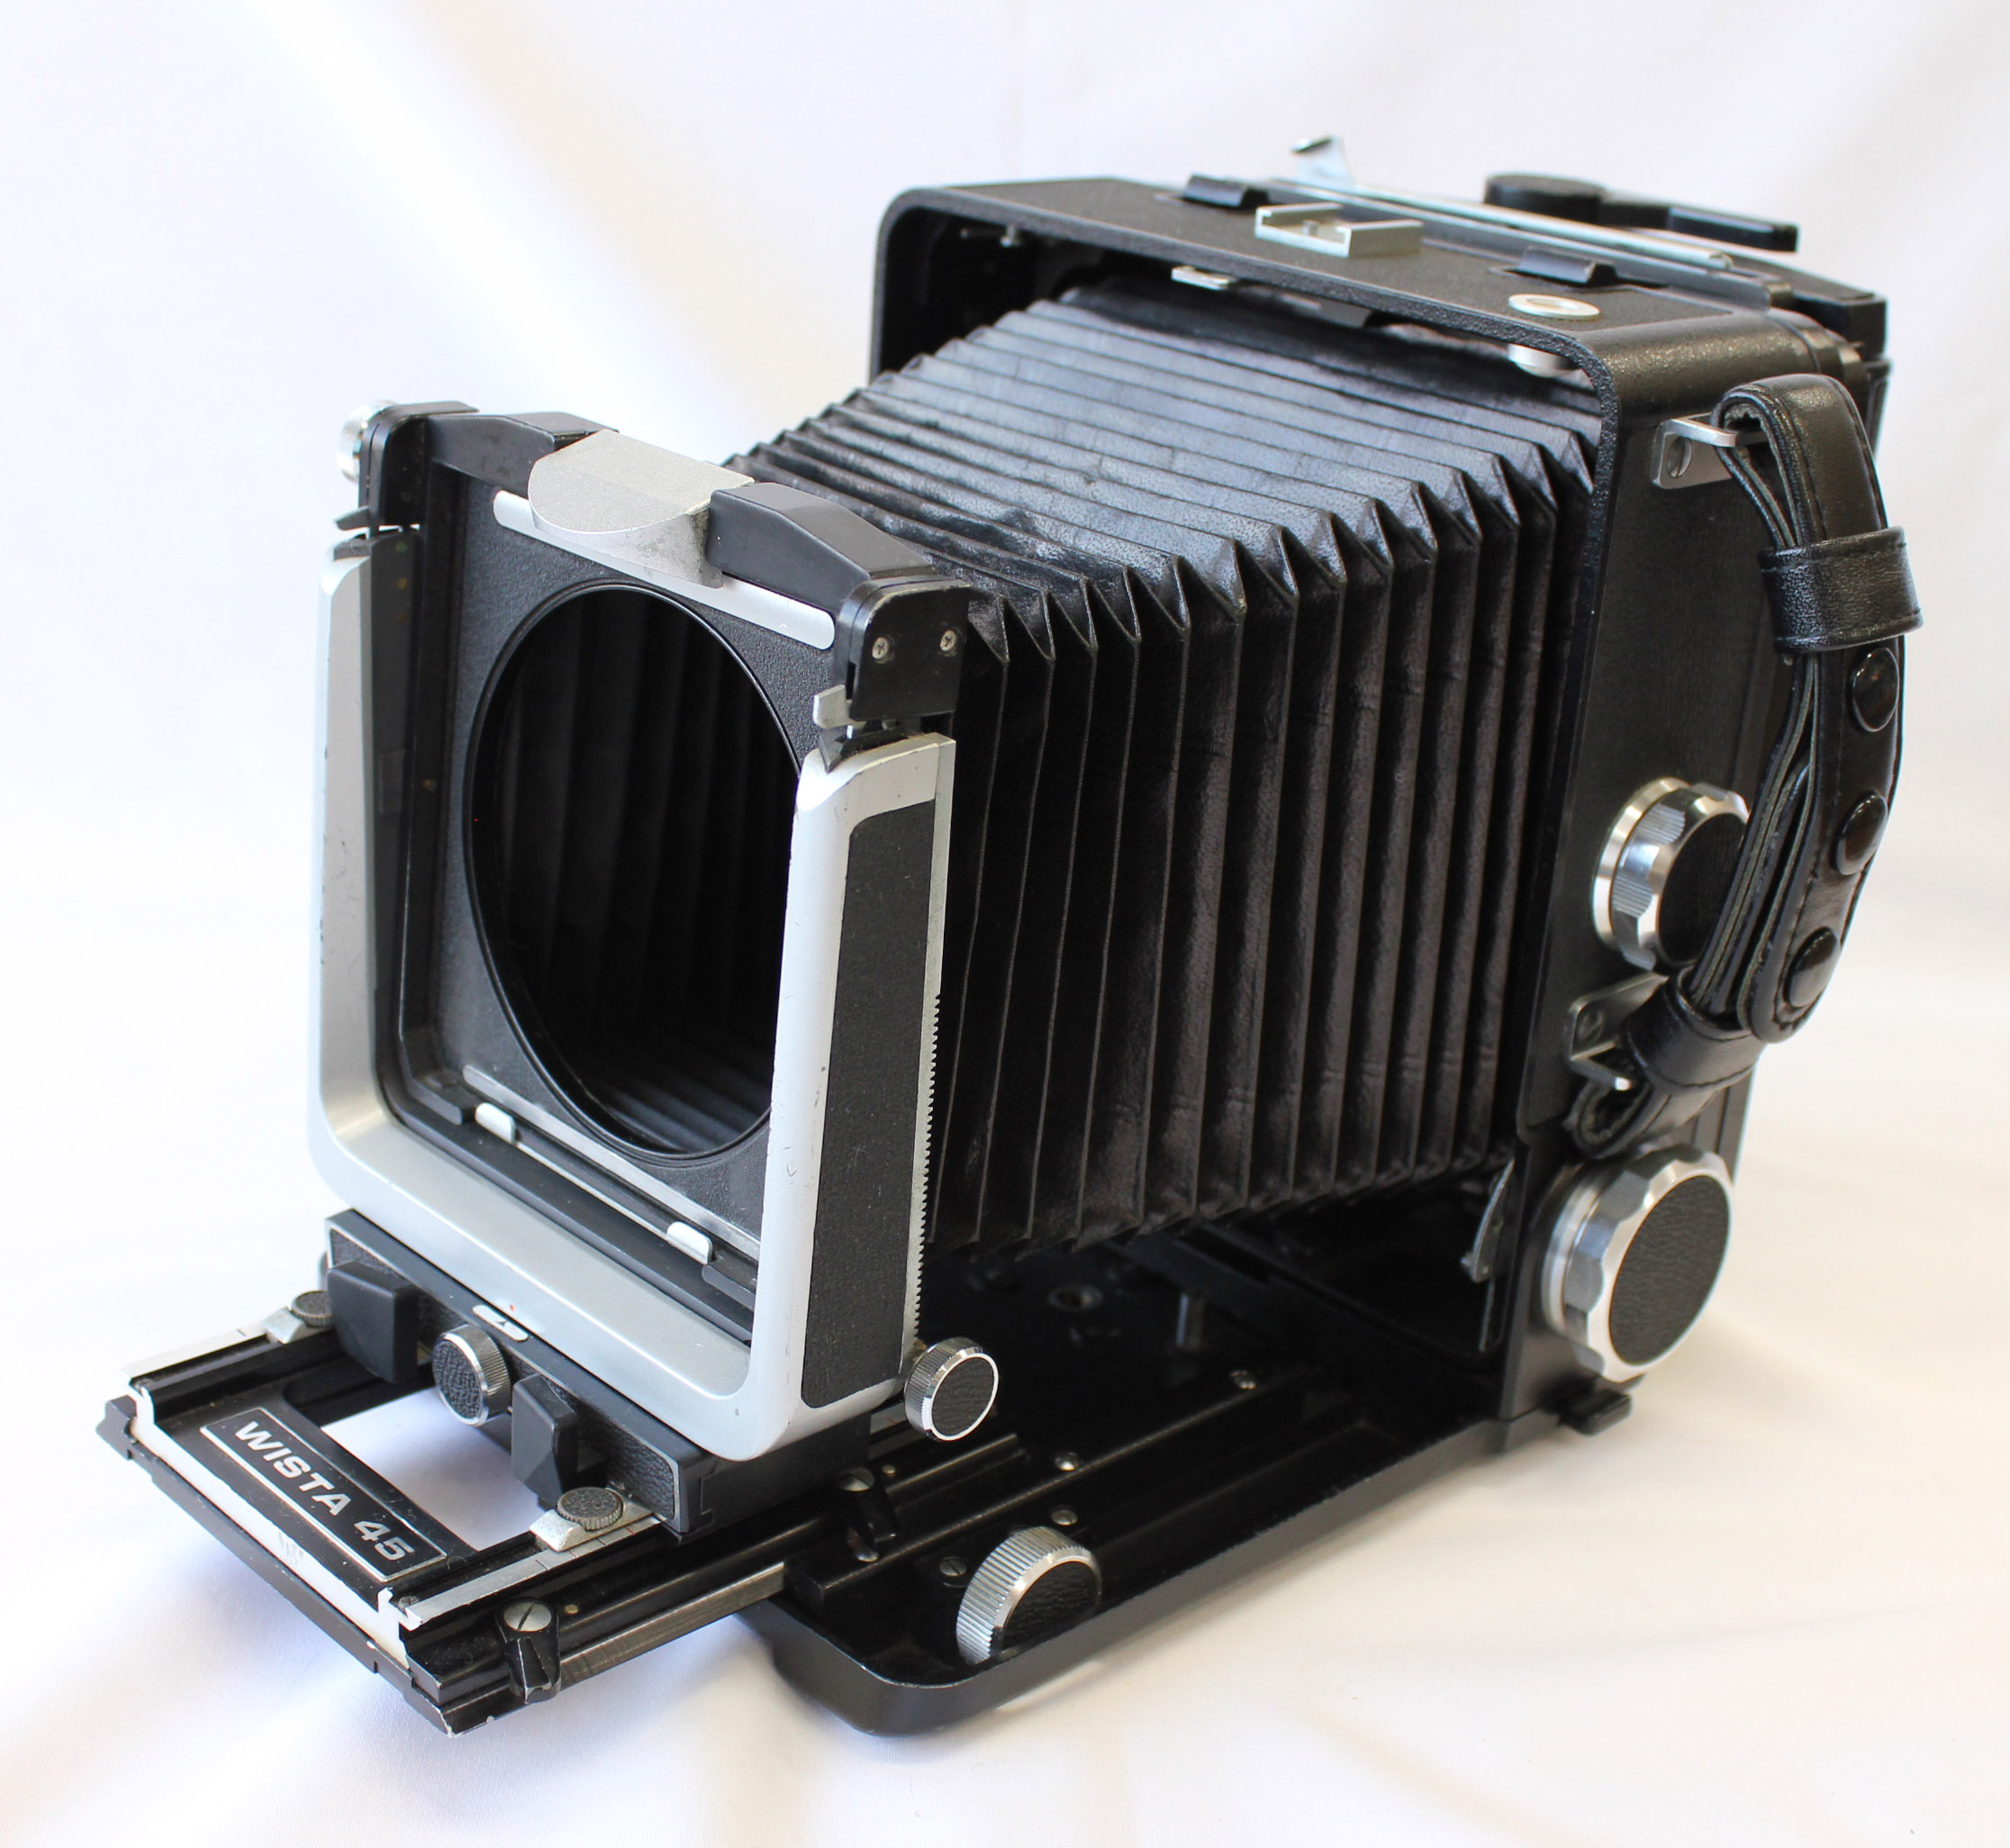 Japan Used Camera Shop | [Exc++++] Wista 45 45D 4x5 Large Format Camera w/ 6x9 Roll FIlm Holder & Quick Roll Slider from Japan